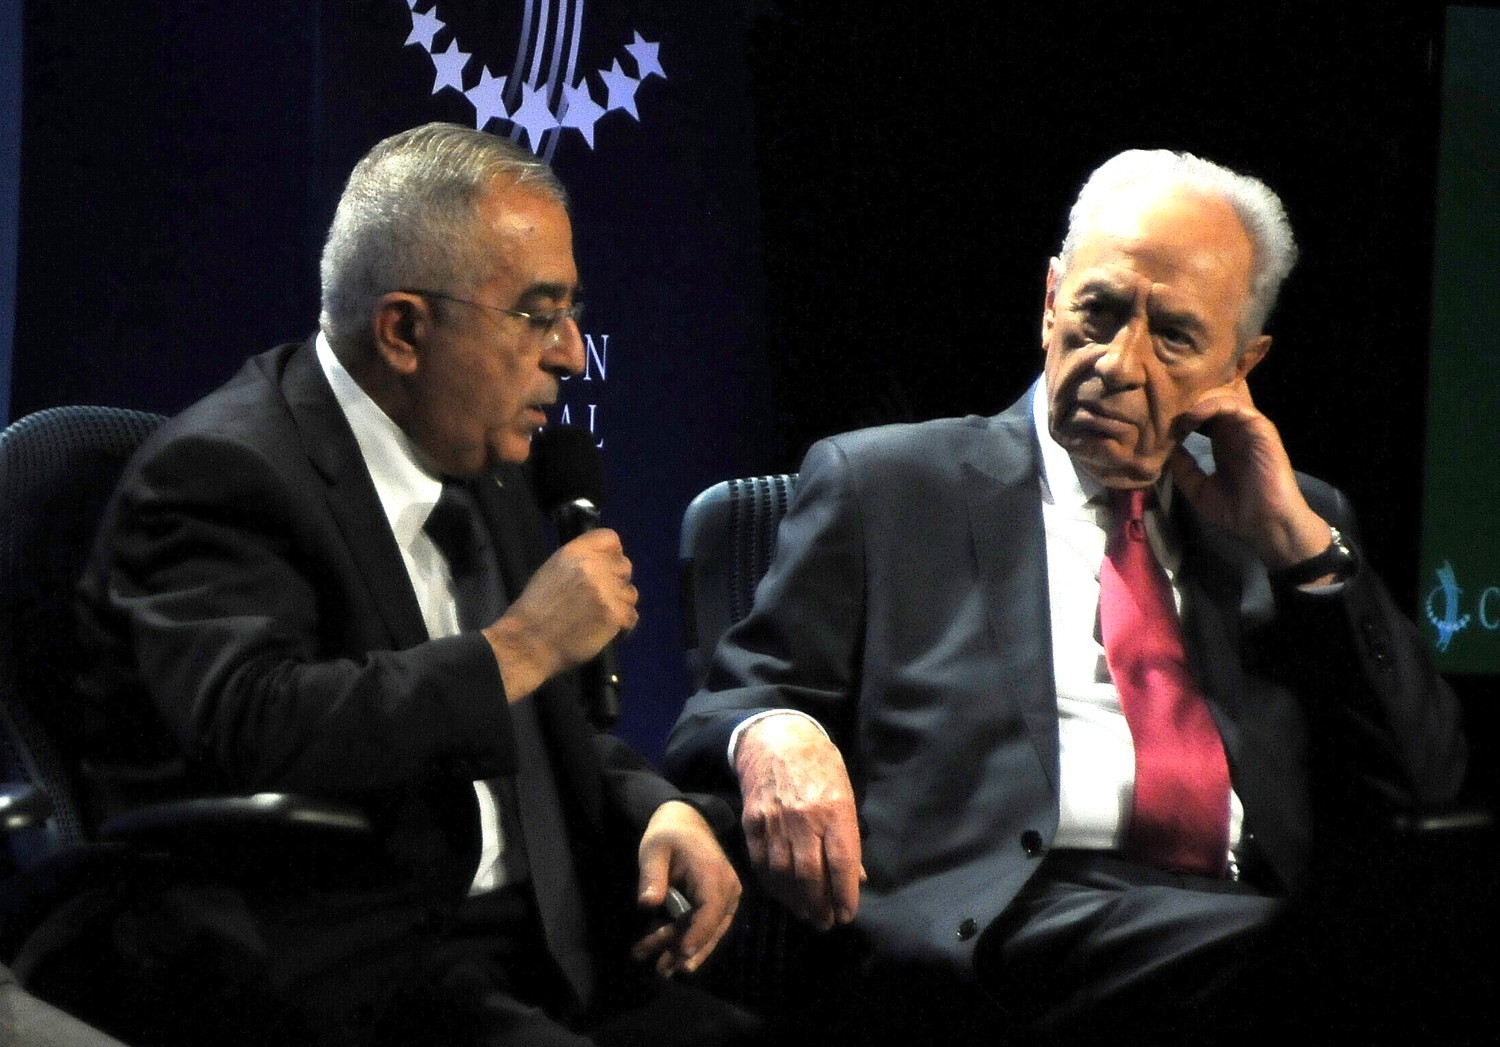 "I think peace would be better for everyone," Palestine National Authority Prime Minister Salam Fayyad tells Israel President Shimon Peres at the 2010 Clinton Global Initiative. "People throughout the region could interact more freely – in peace, security.” © 2016 Karen Rubin/news-photos-features.com